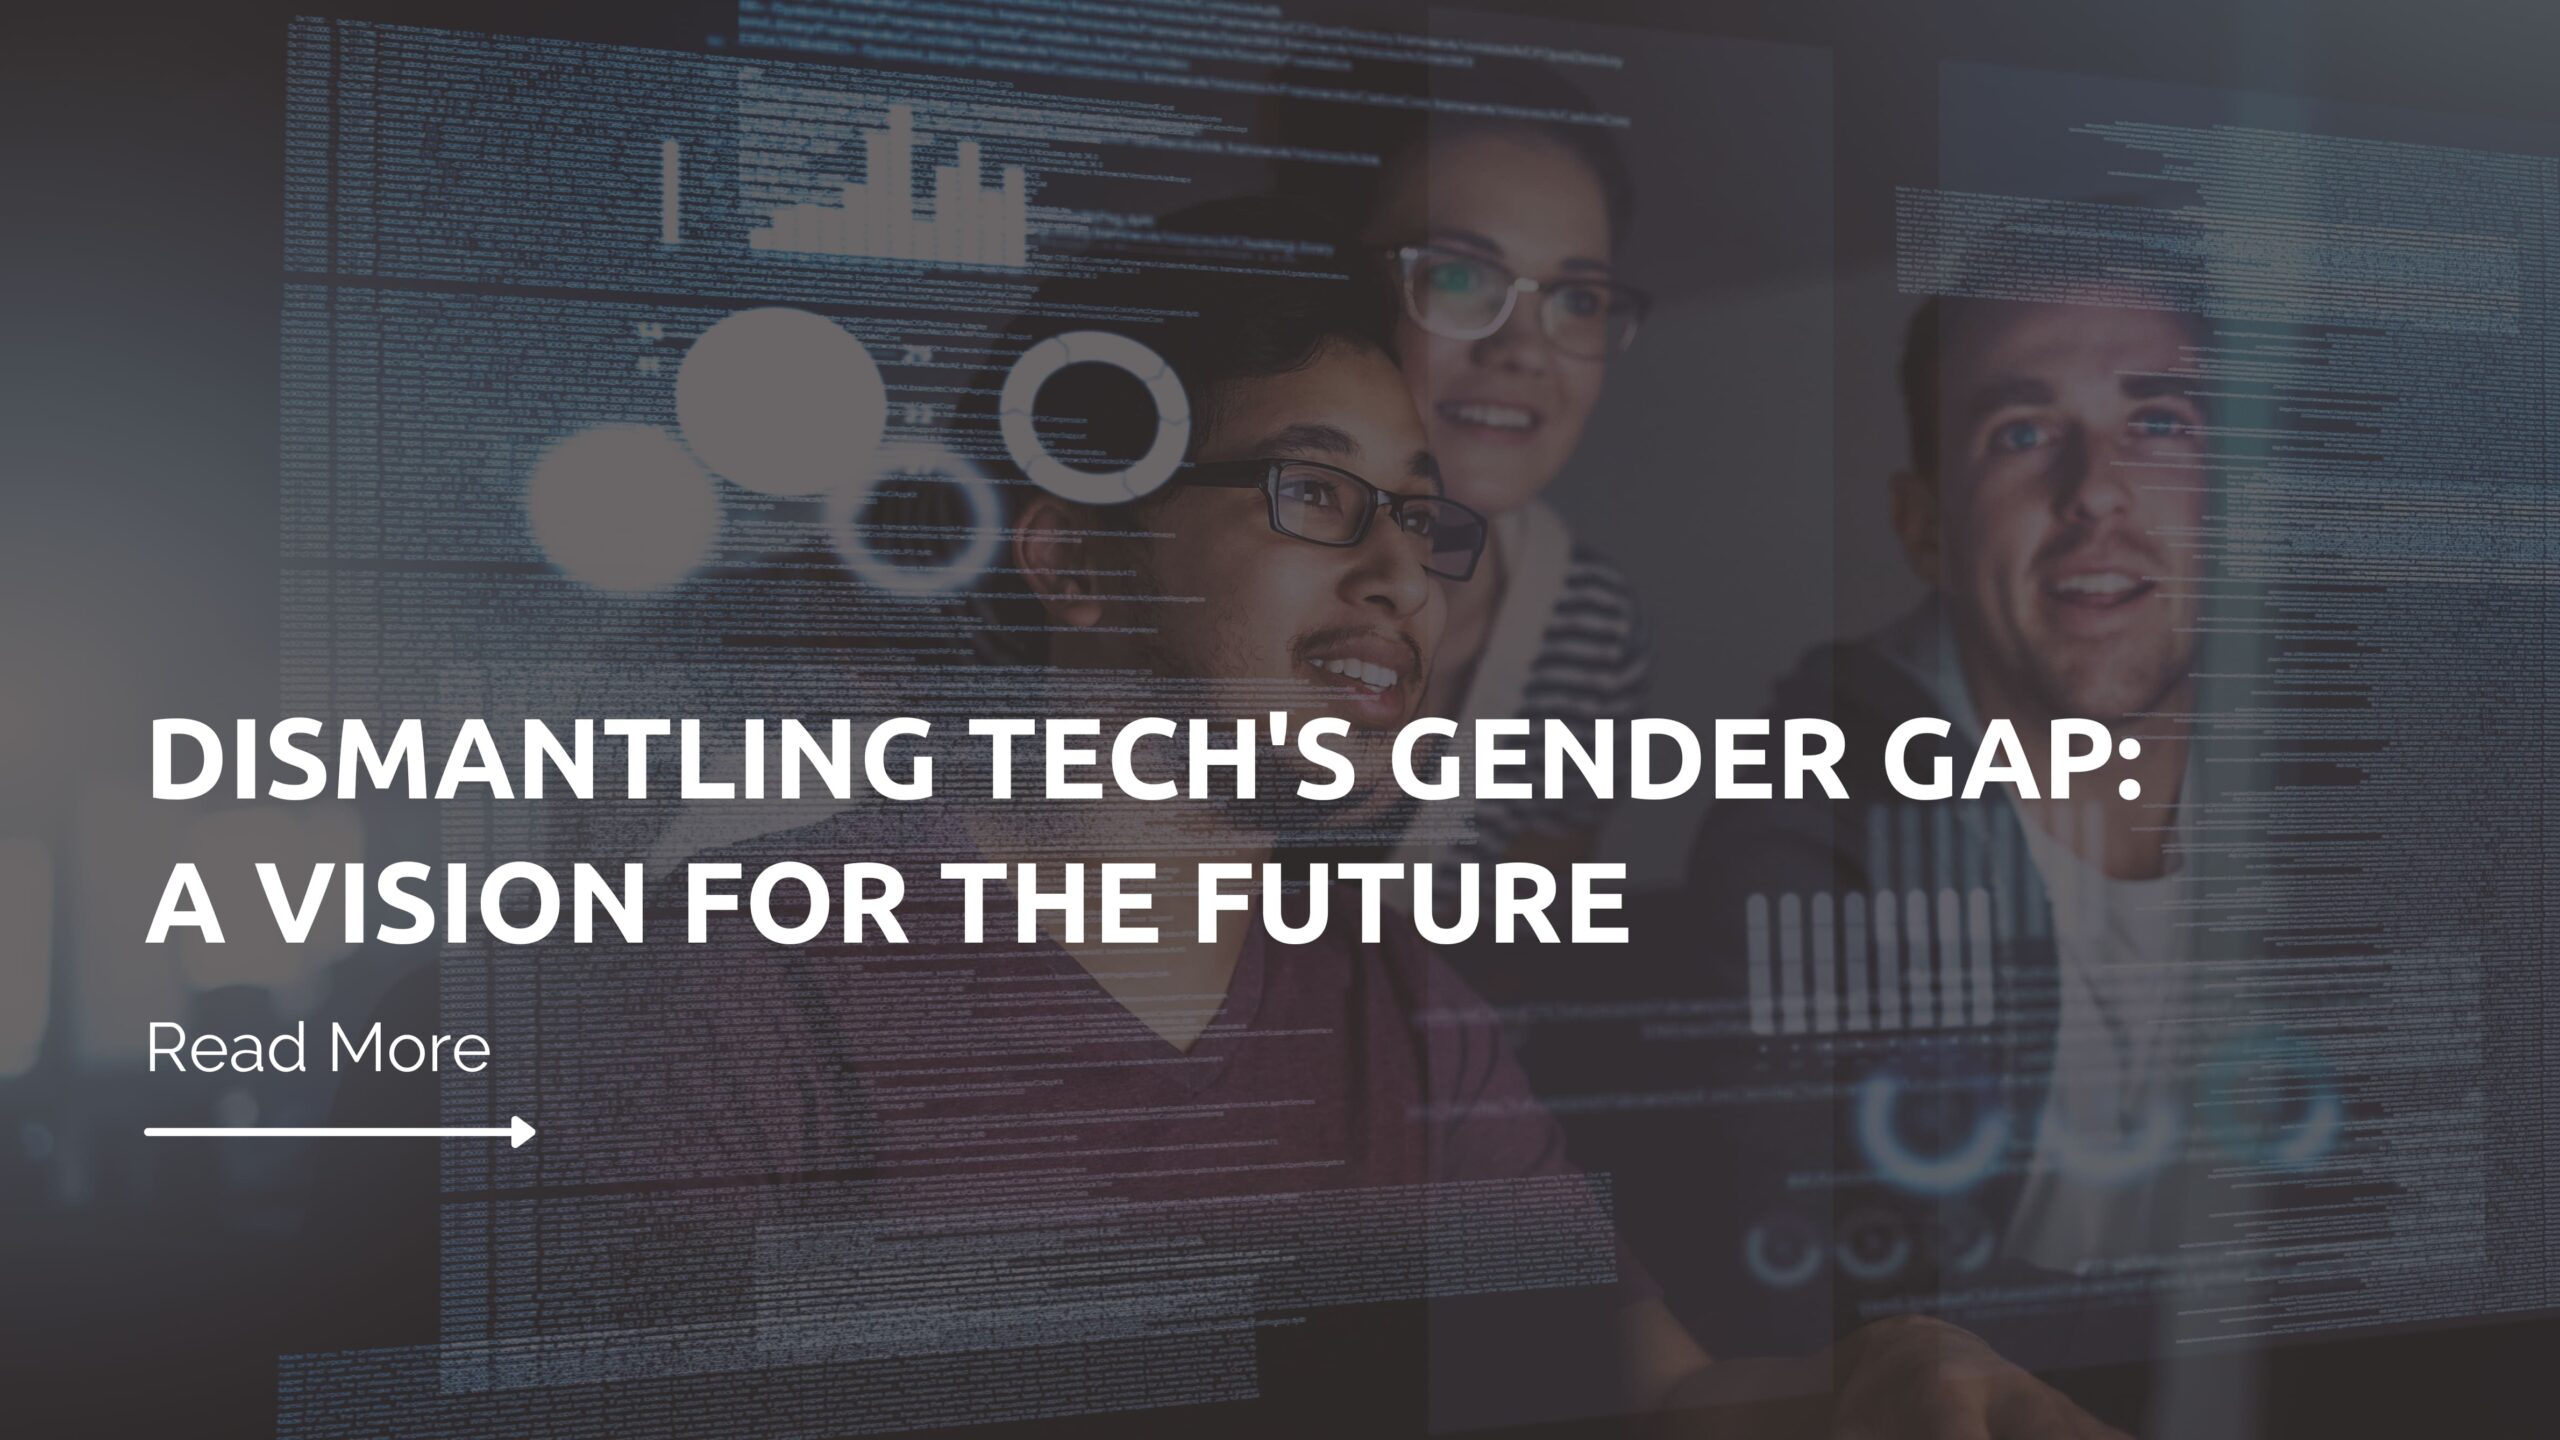 Dismantling Tech's Gender Gap: A vision for the future